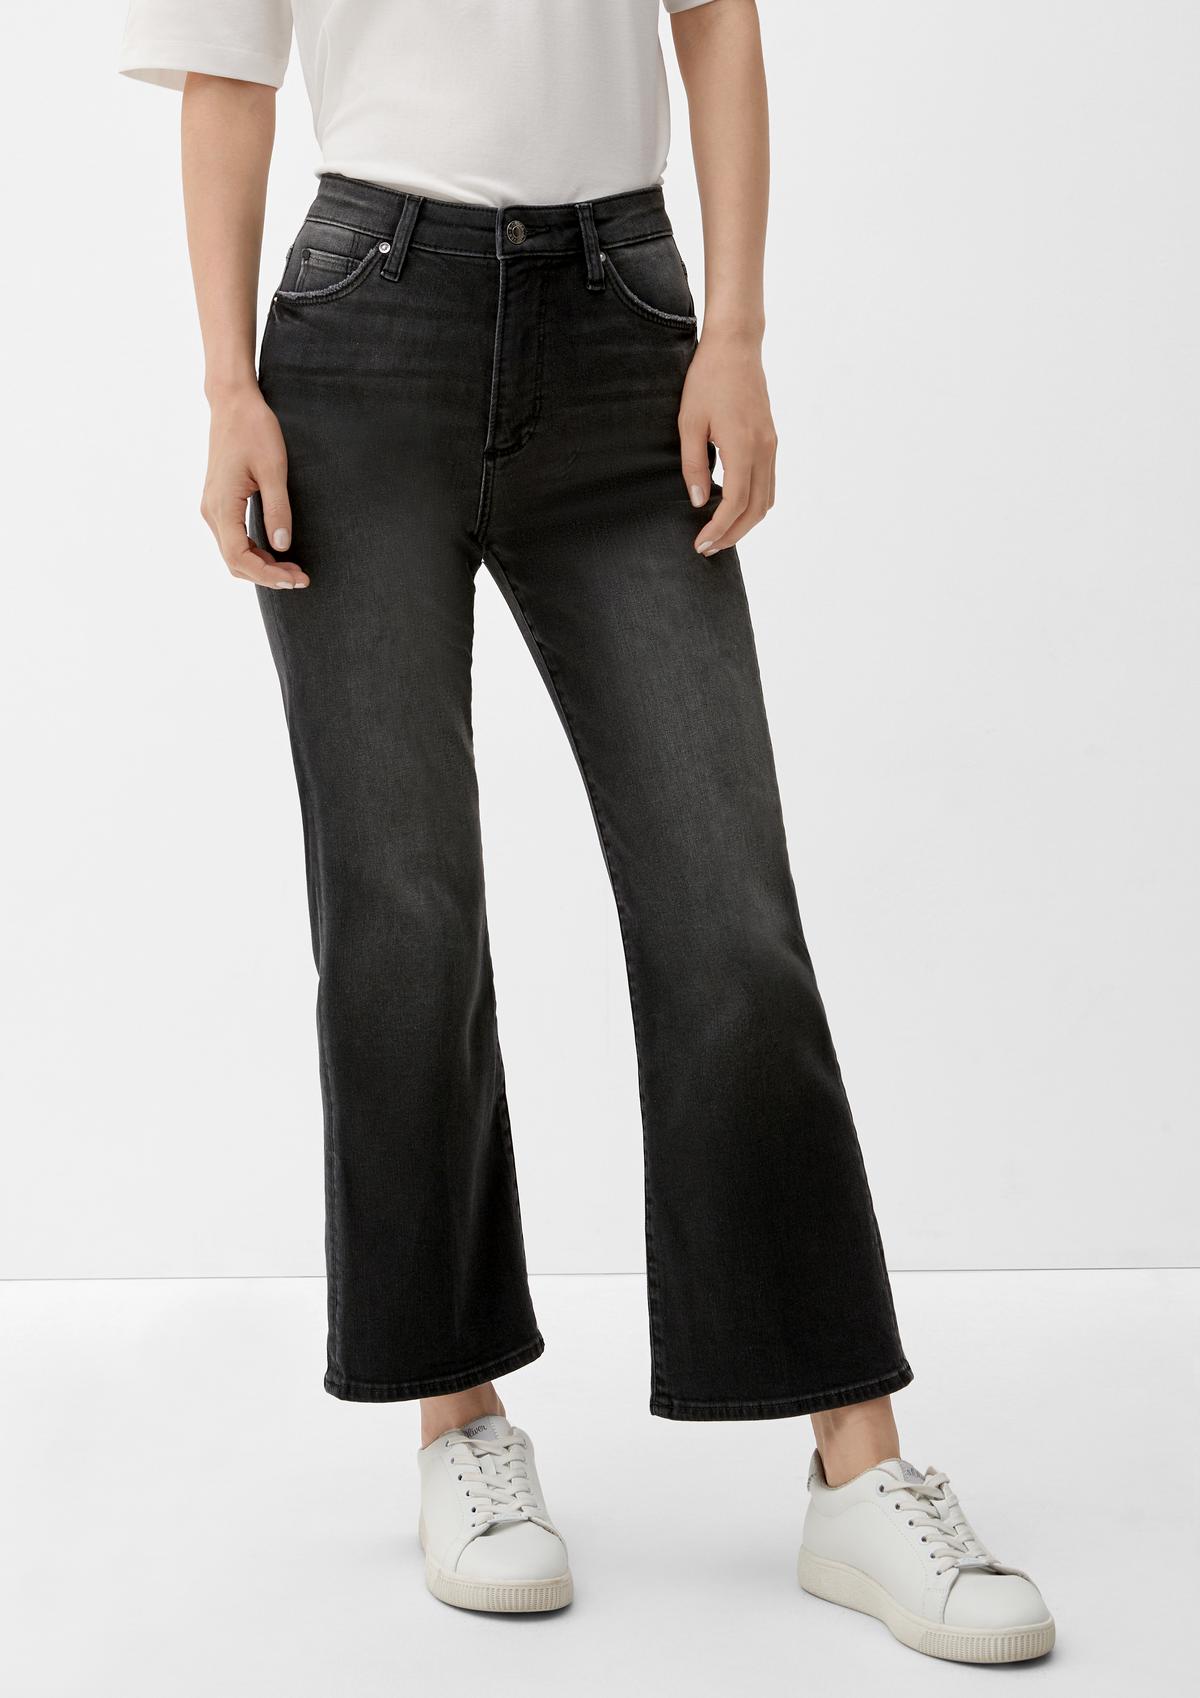 Slim fit: jeans with a flared leg